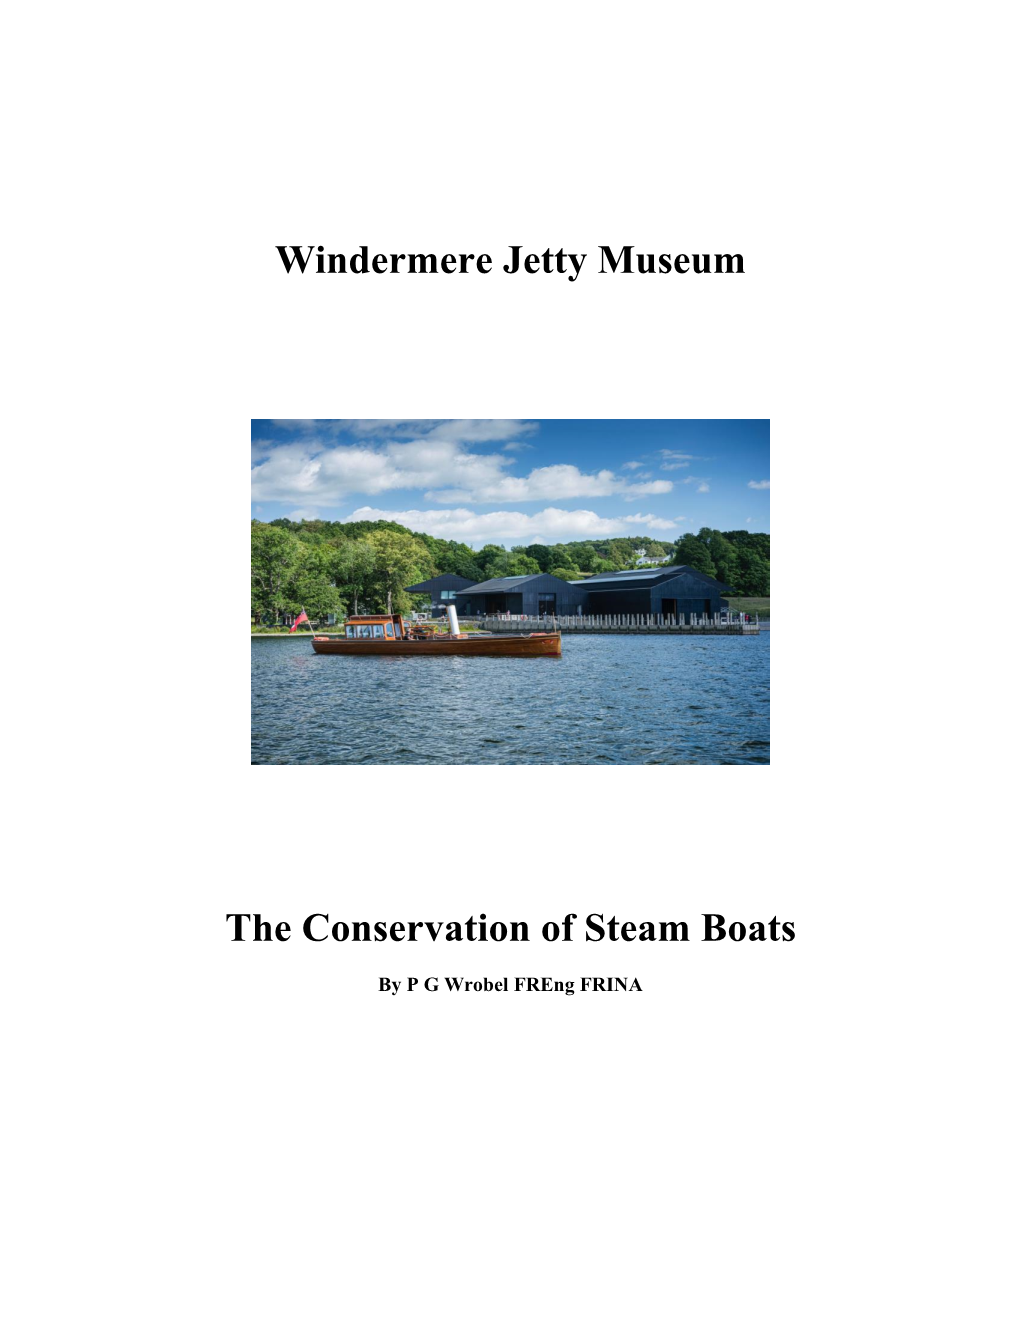 Windermere Jetty Museum the Conservation of Steam Boats